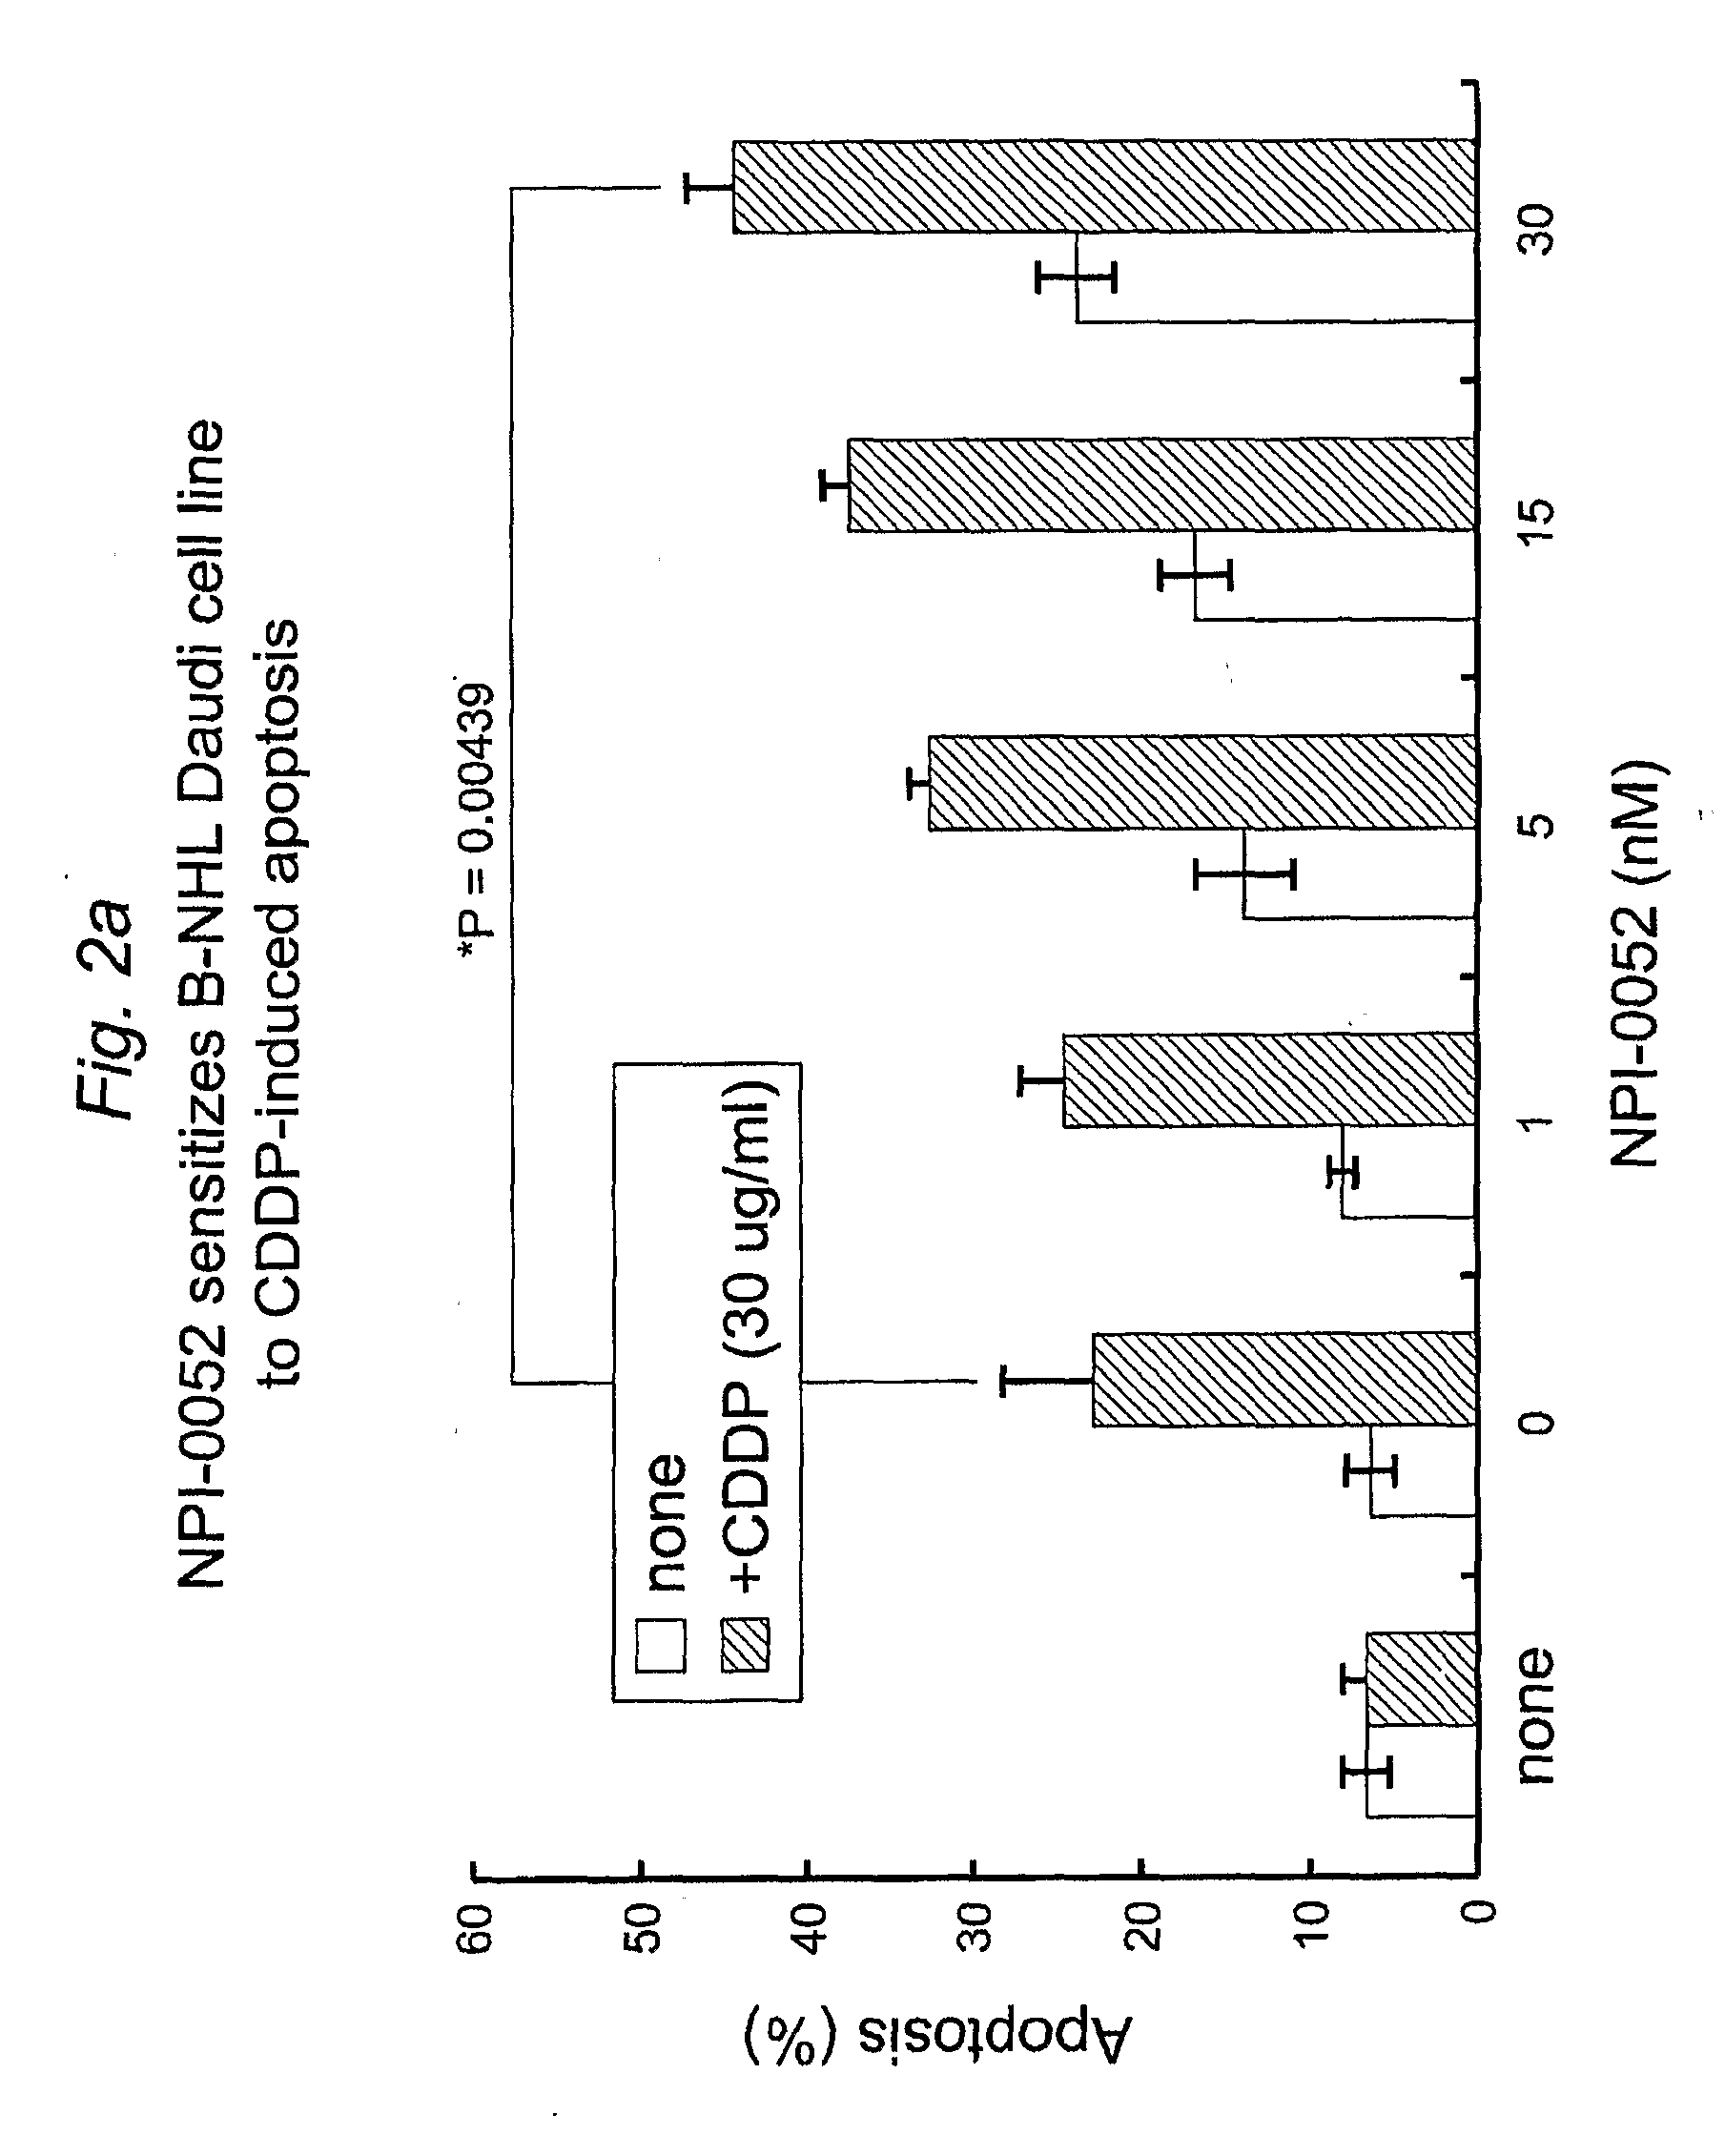 Methods of sensitizing cancer to therapy-induced cytotoxicity